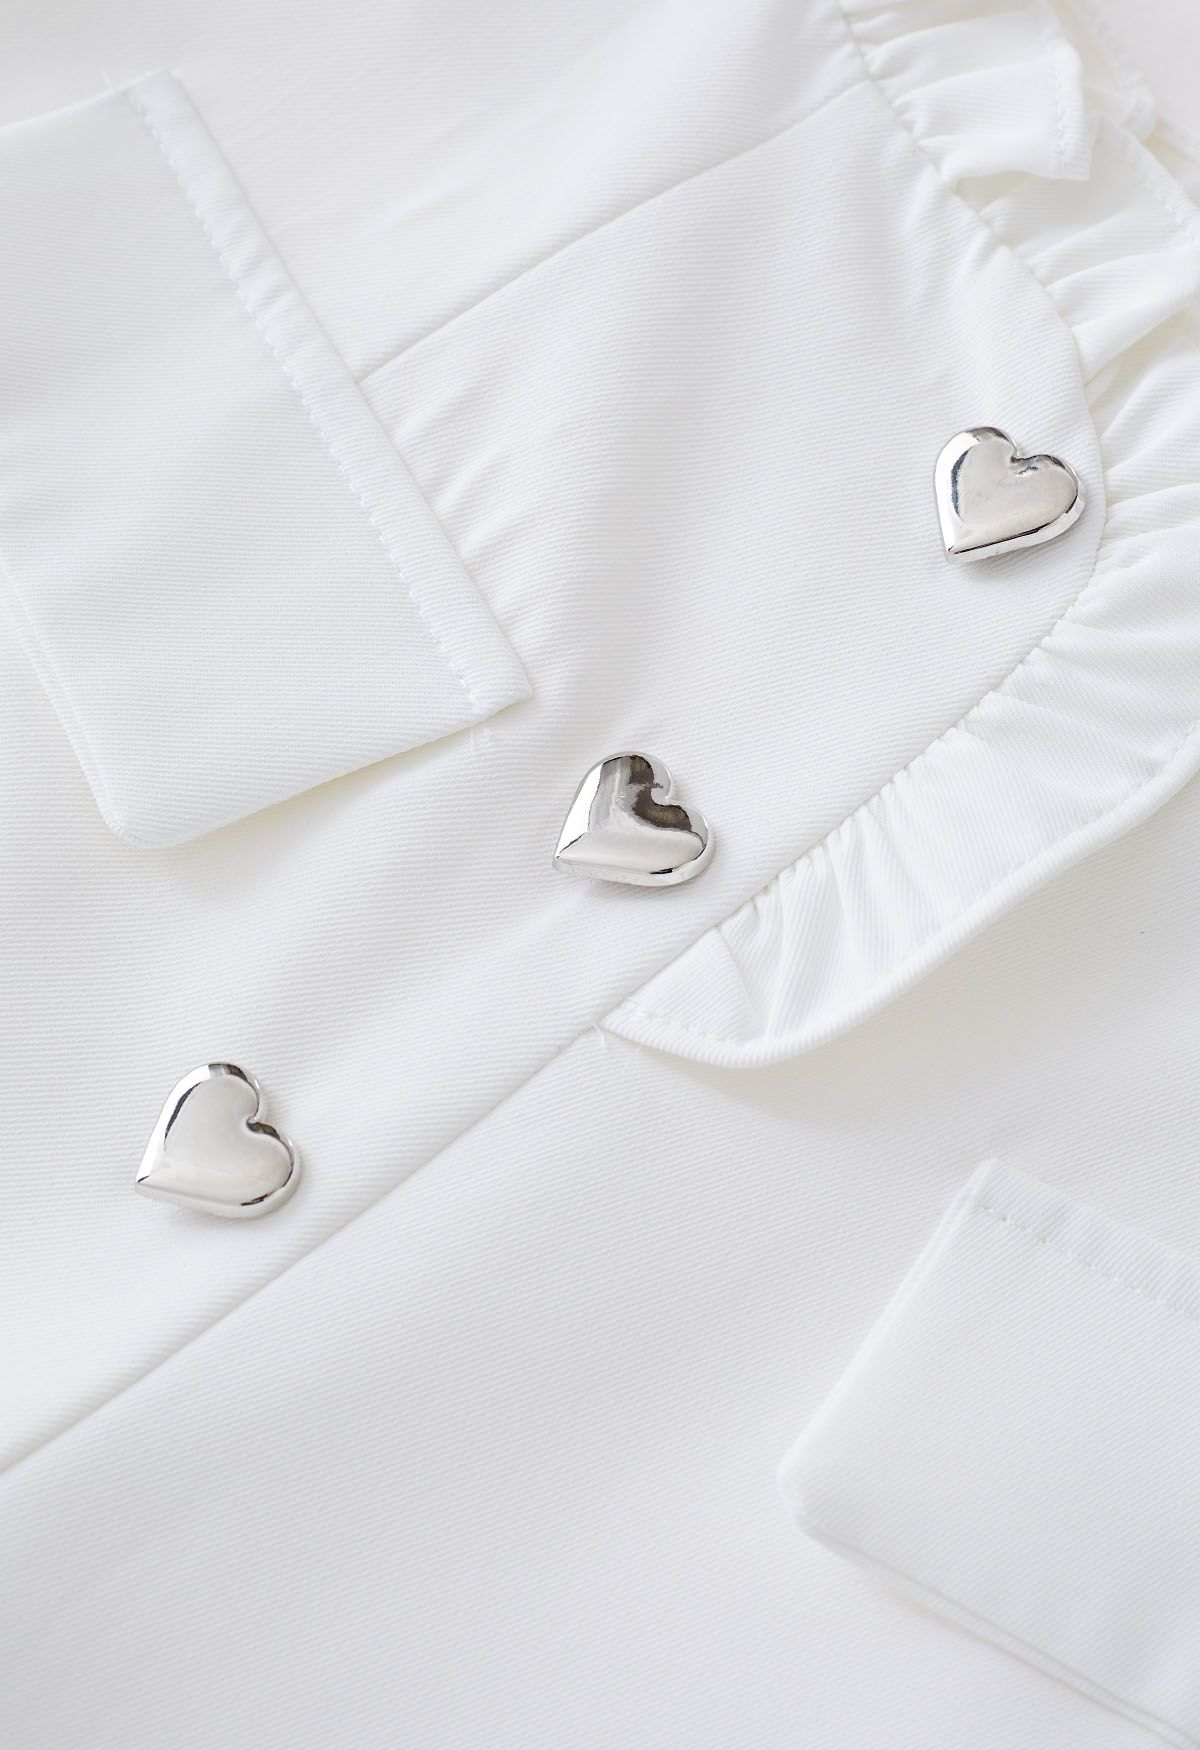 Heart-Shape Buttons Ruffle Trimmed Shorts in White